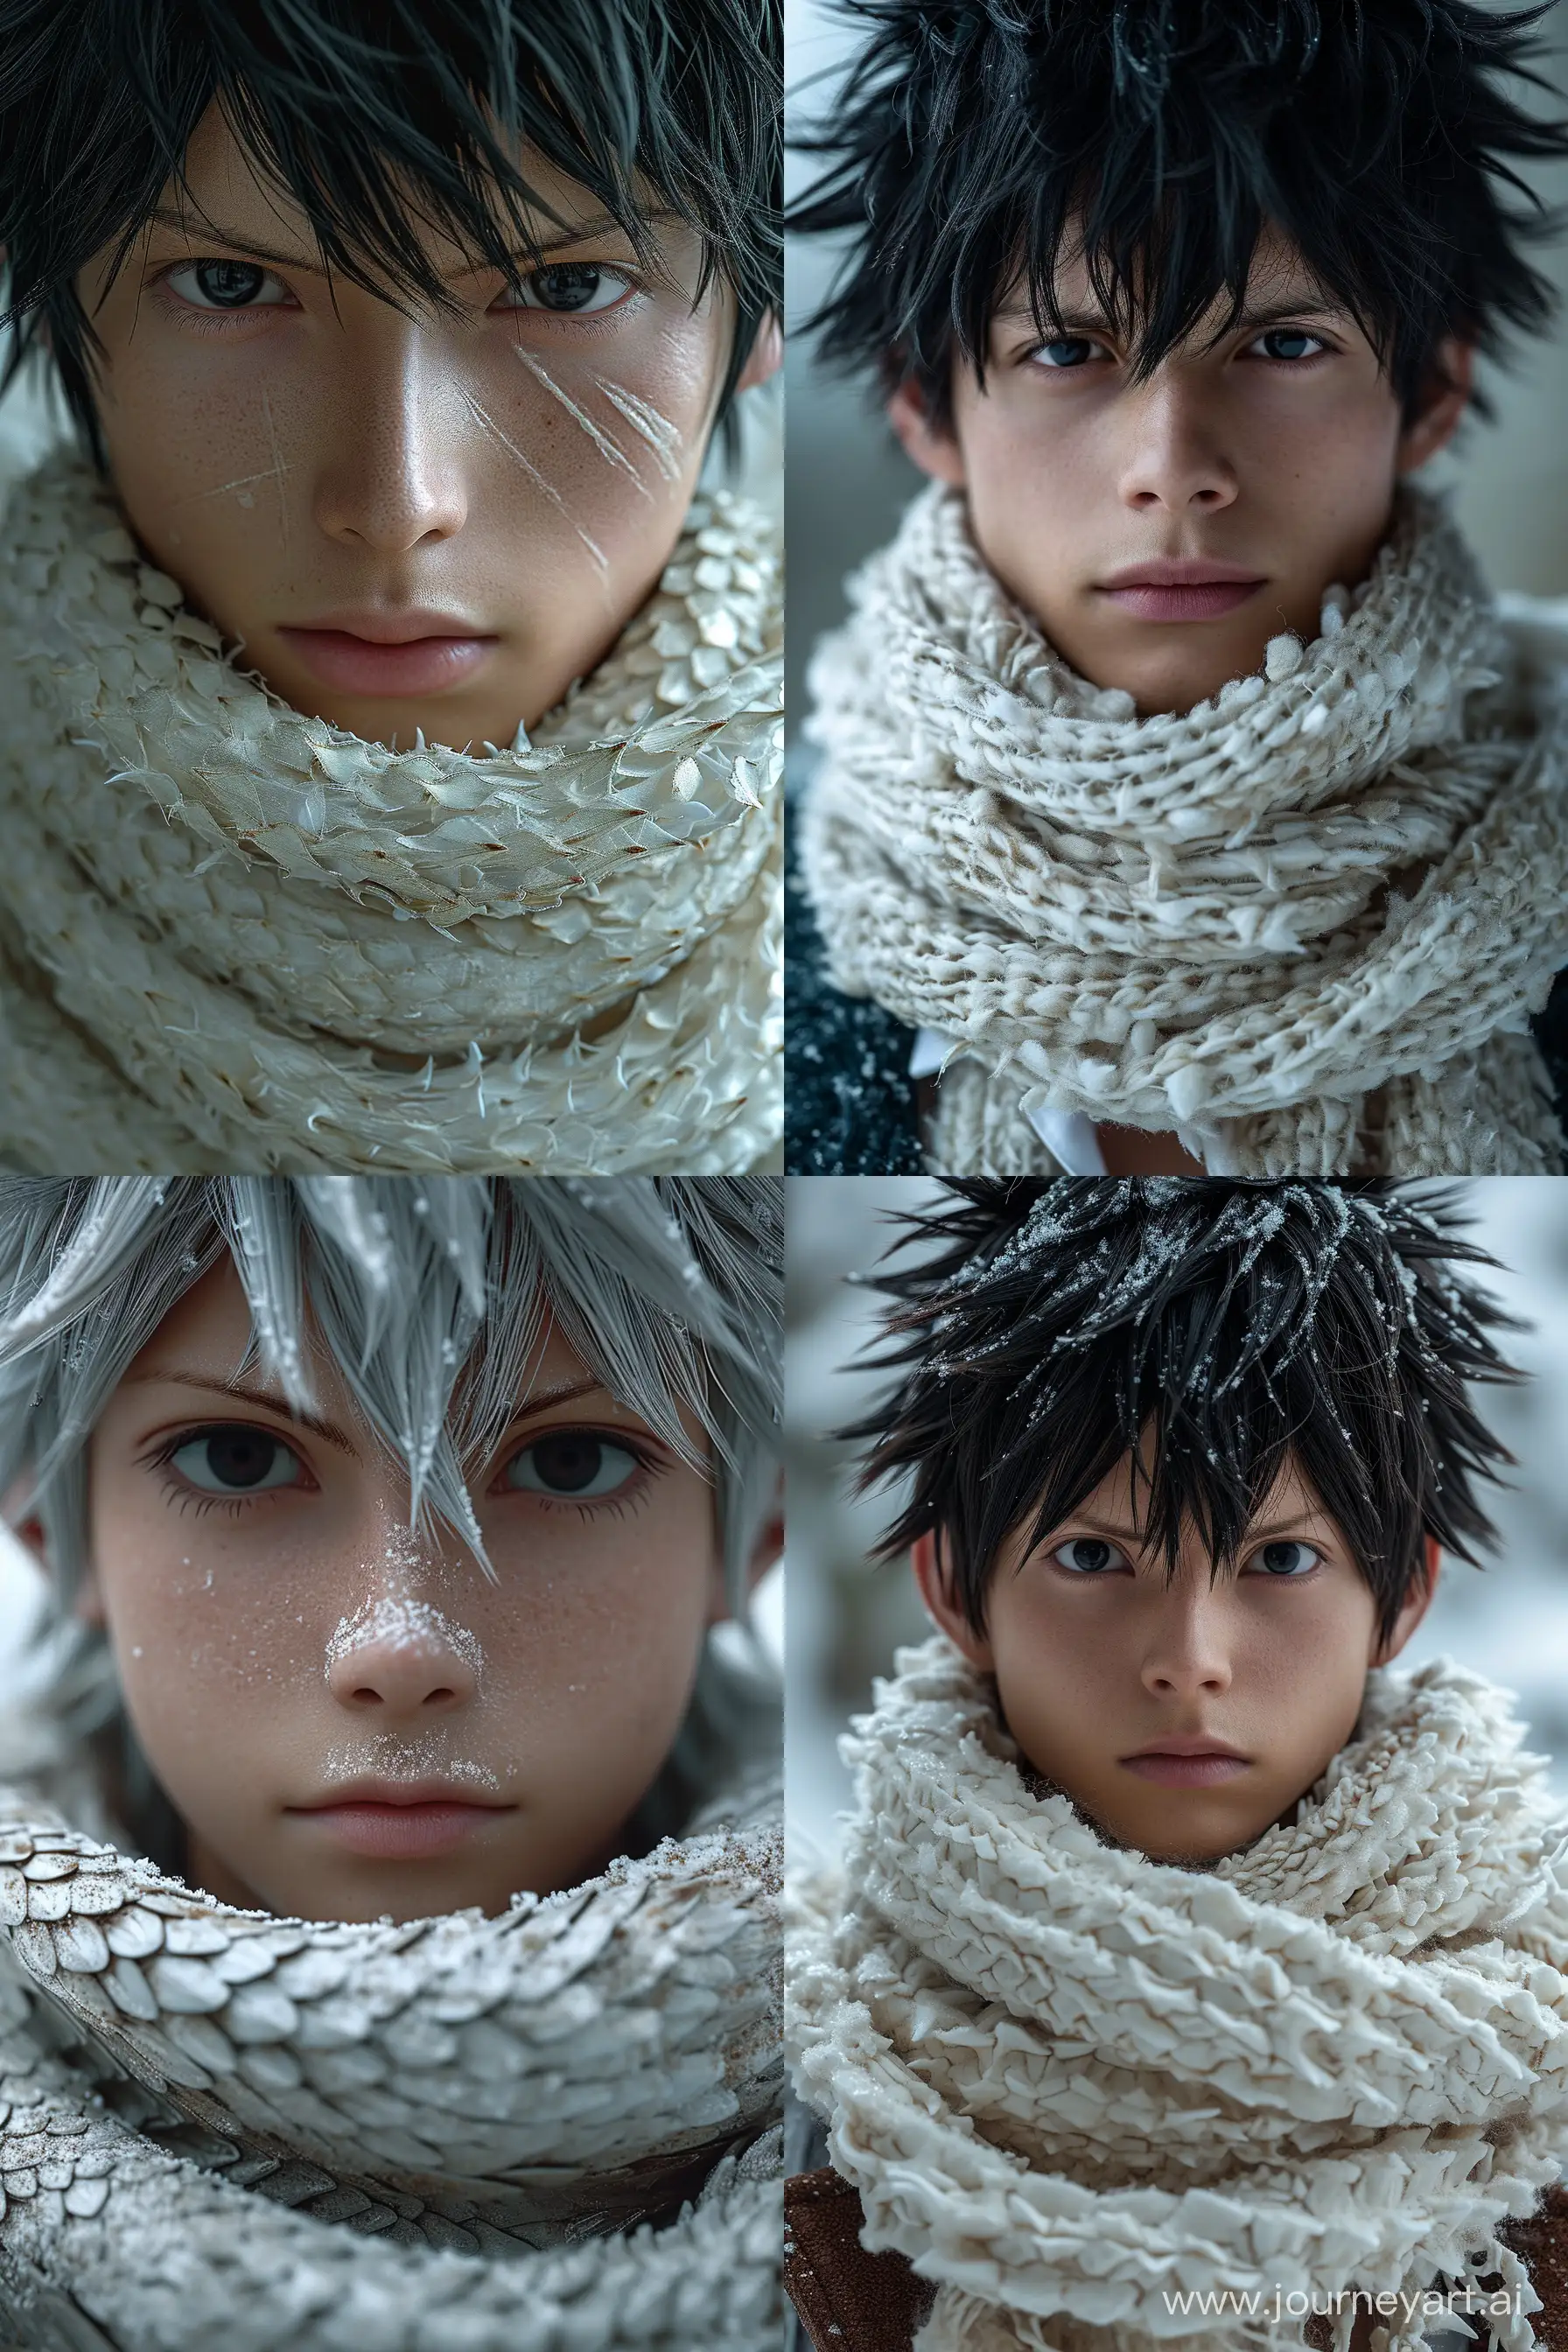 Epic-Hyperrealism-Natsu-19YearOld-Mage-in-Dragon-Scale-Scarf-Photo